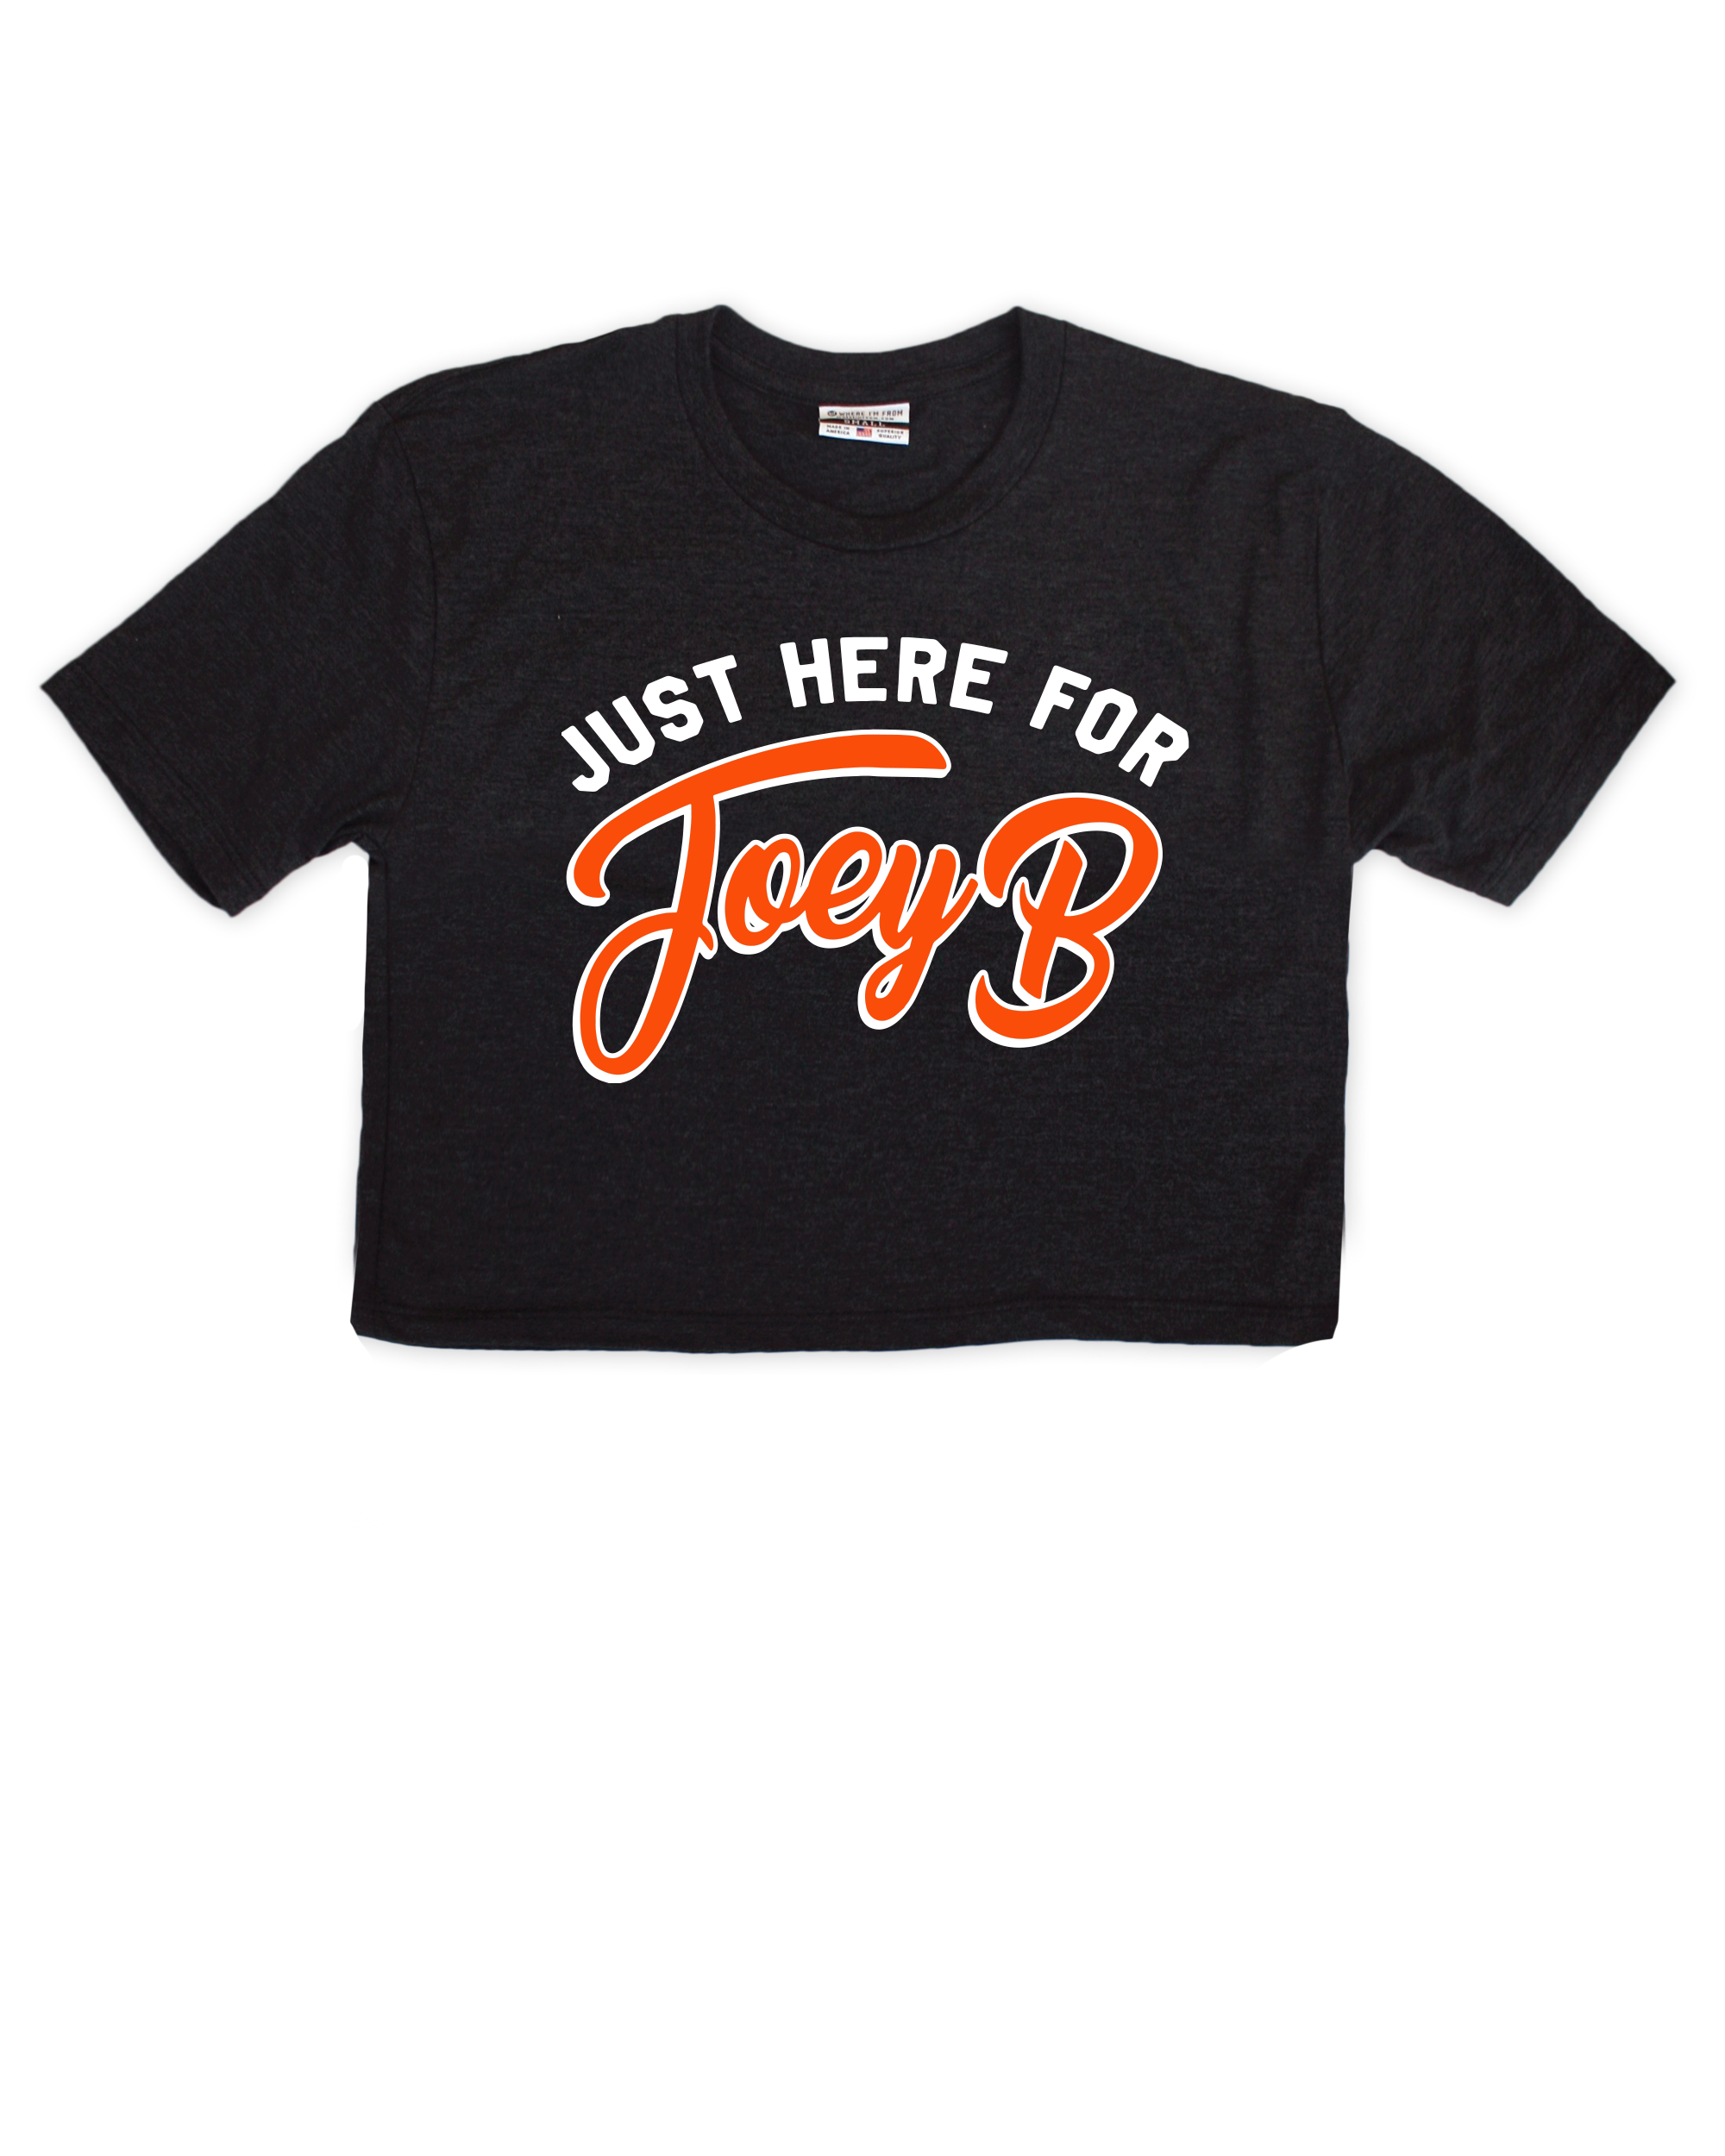 Here for Joey B Crop Top